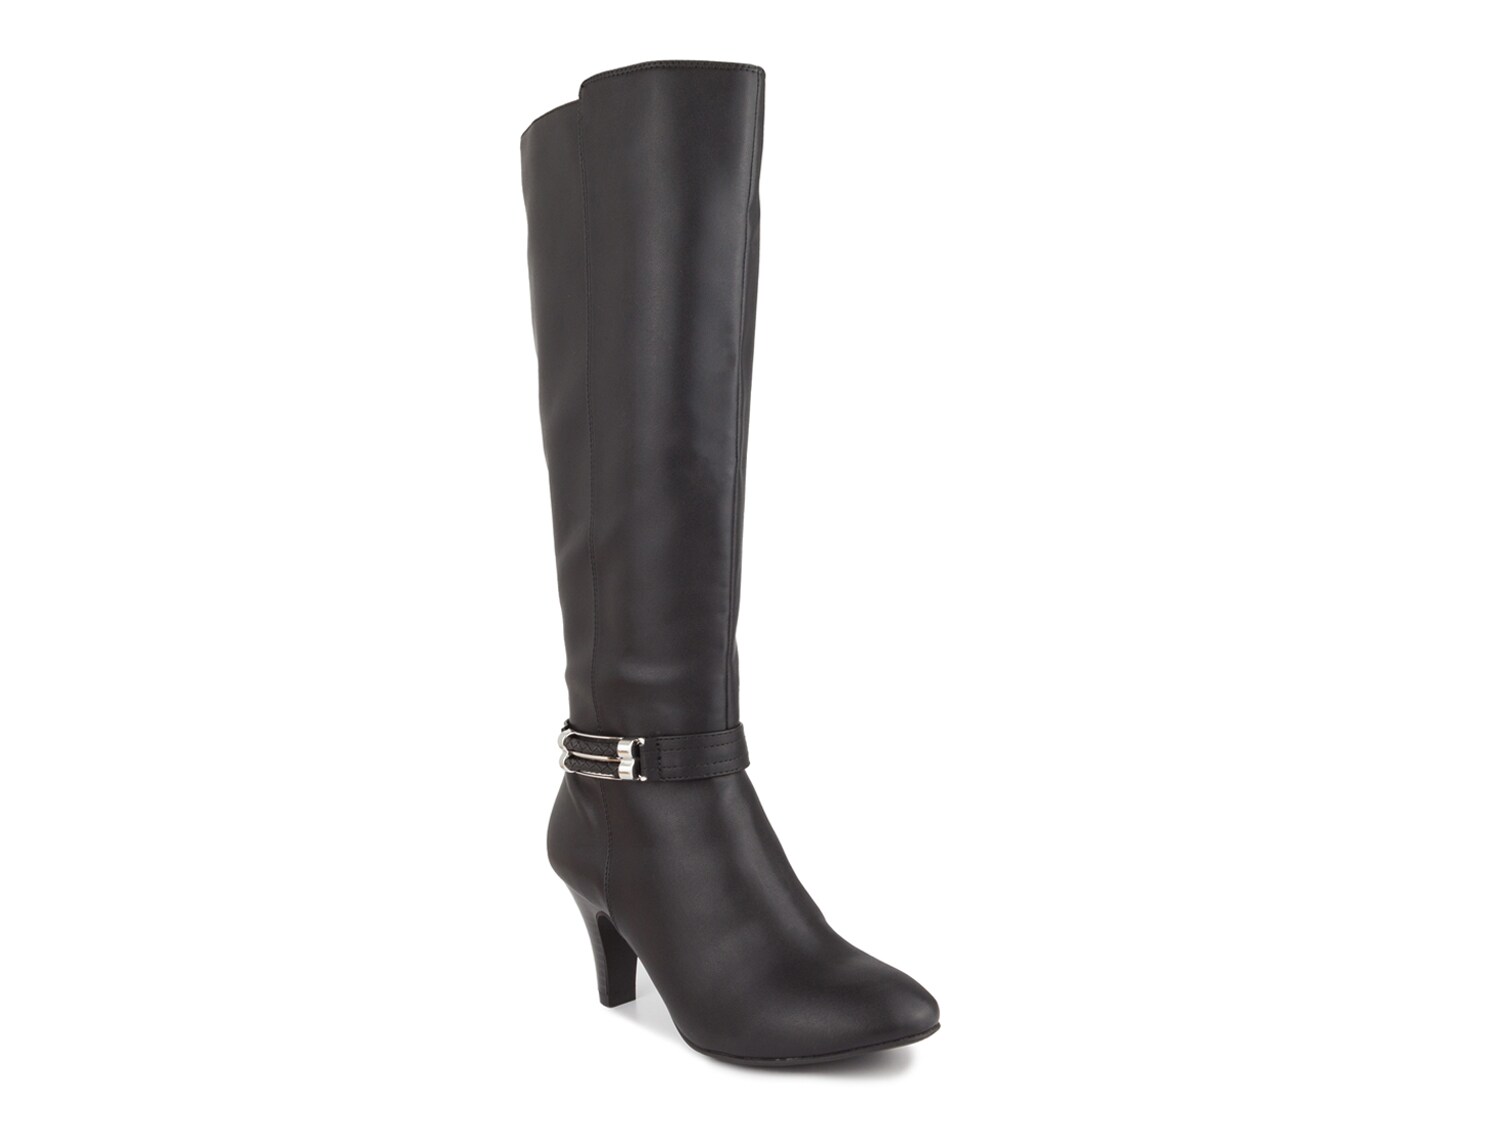 London Fog Event 2 Riding Boot - Free Shipping | DSW